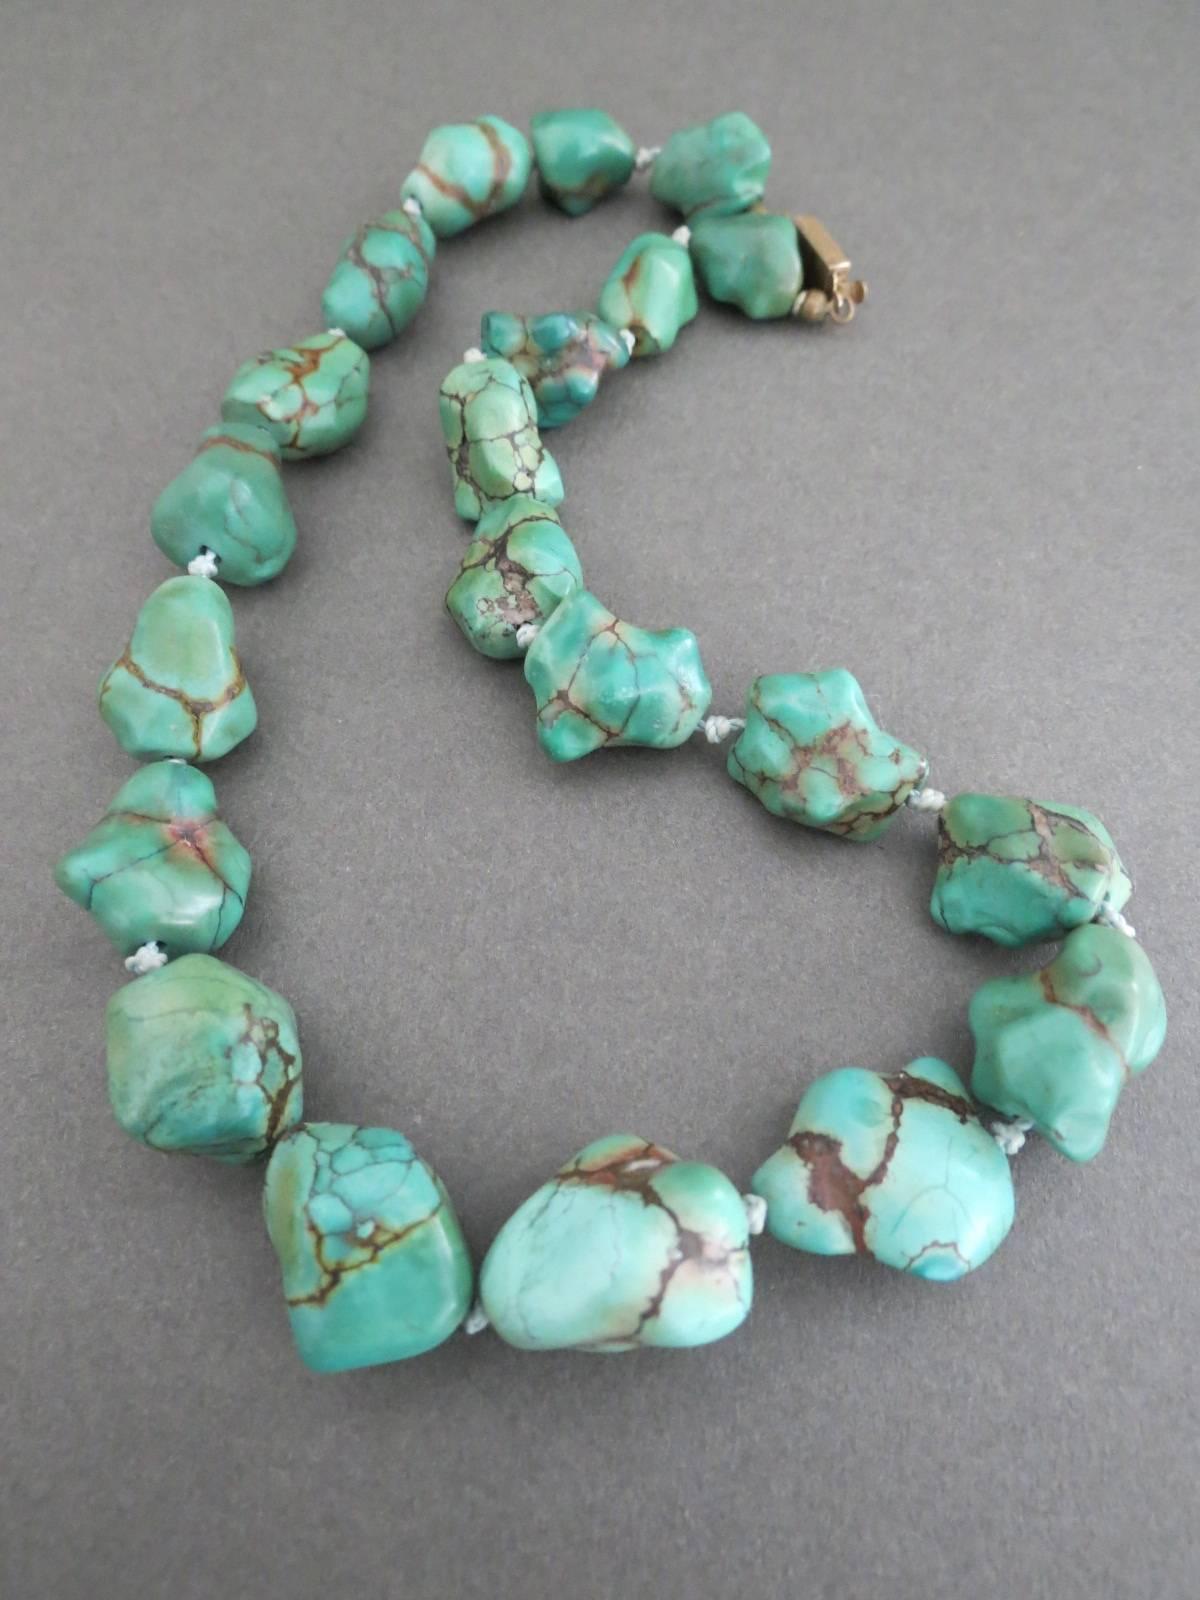 Vintage Chinese Turquoise Nugget Necklace Gold Plated Clasp In Good Condition For Sale In Hove, GB